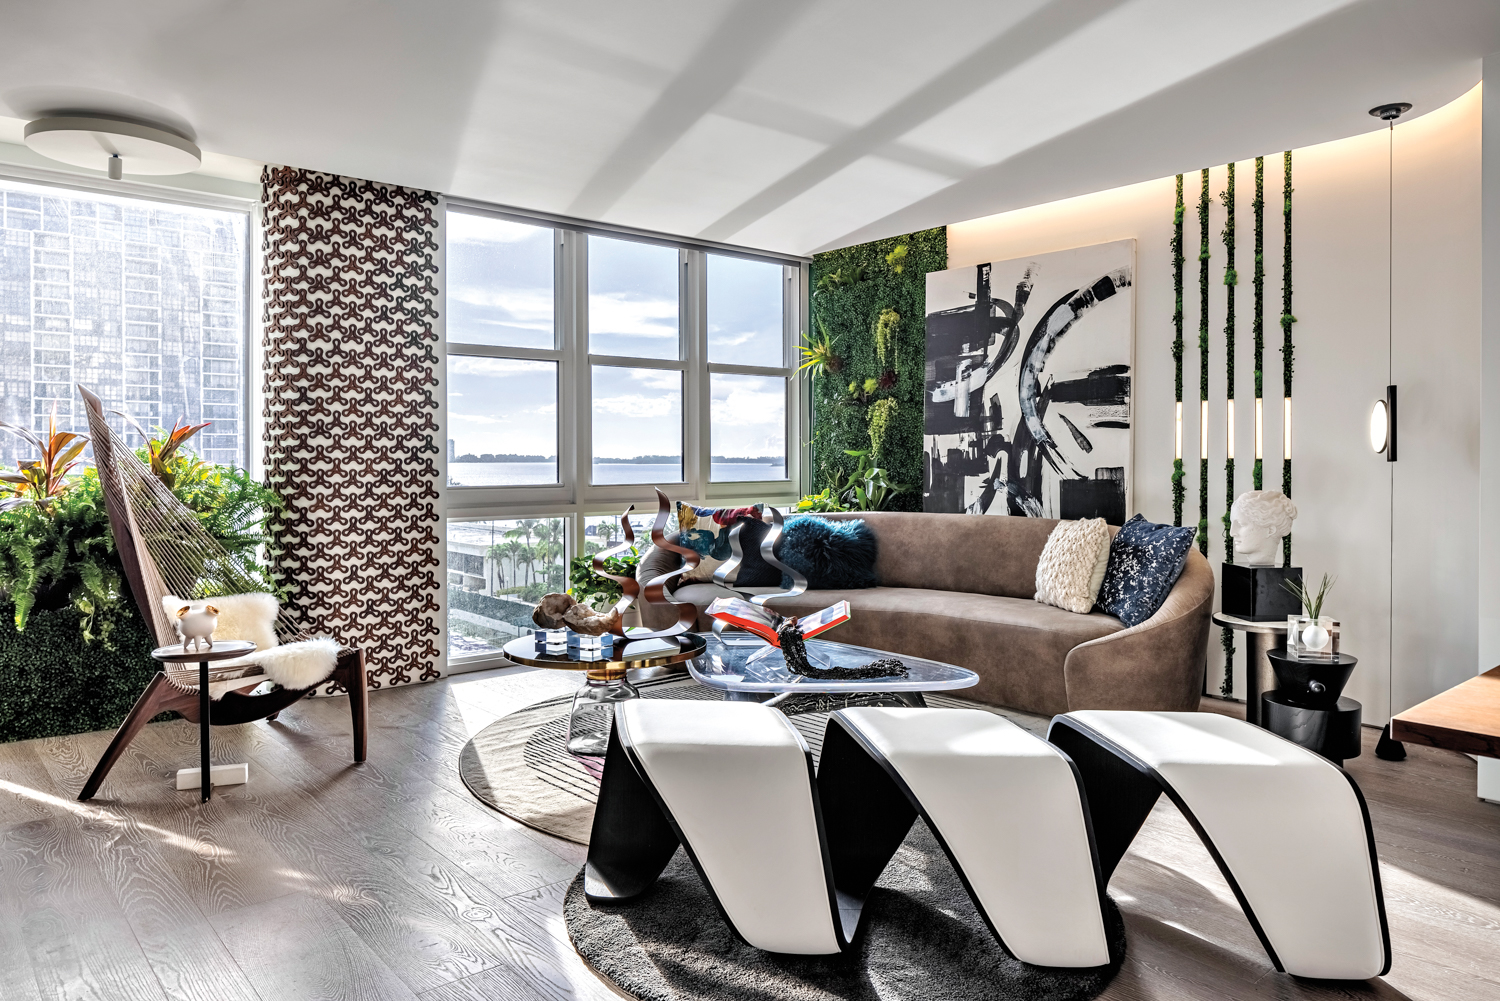 No Space Is Wasted In This Miami Condo With A Focus On Sustainability